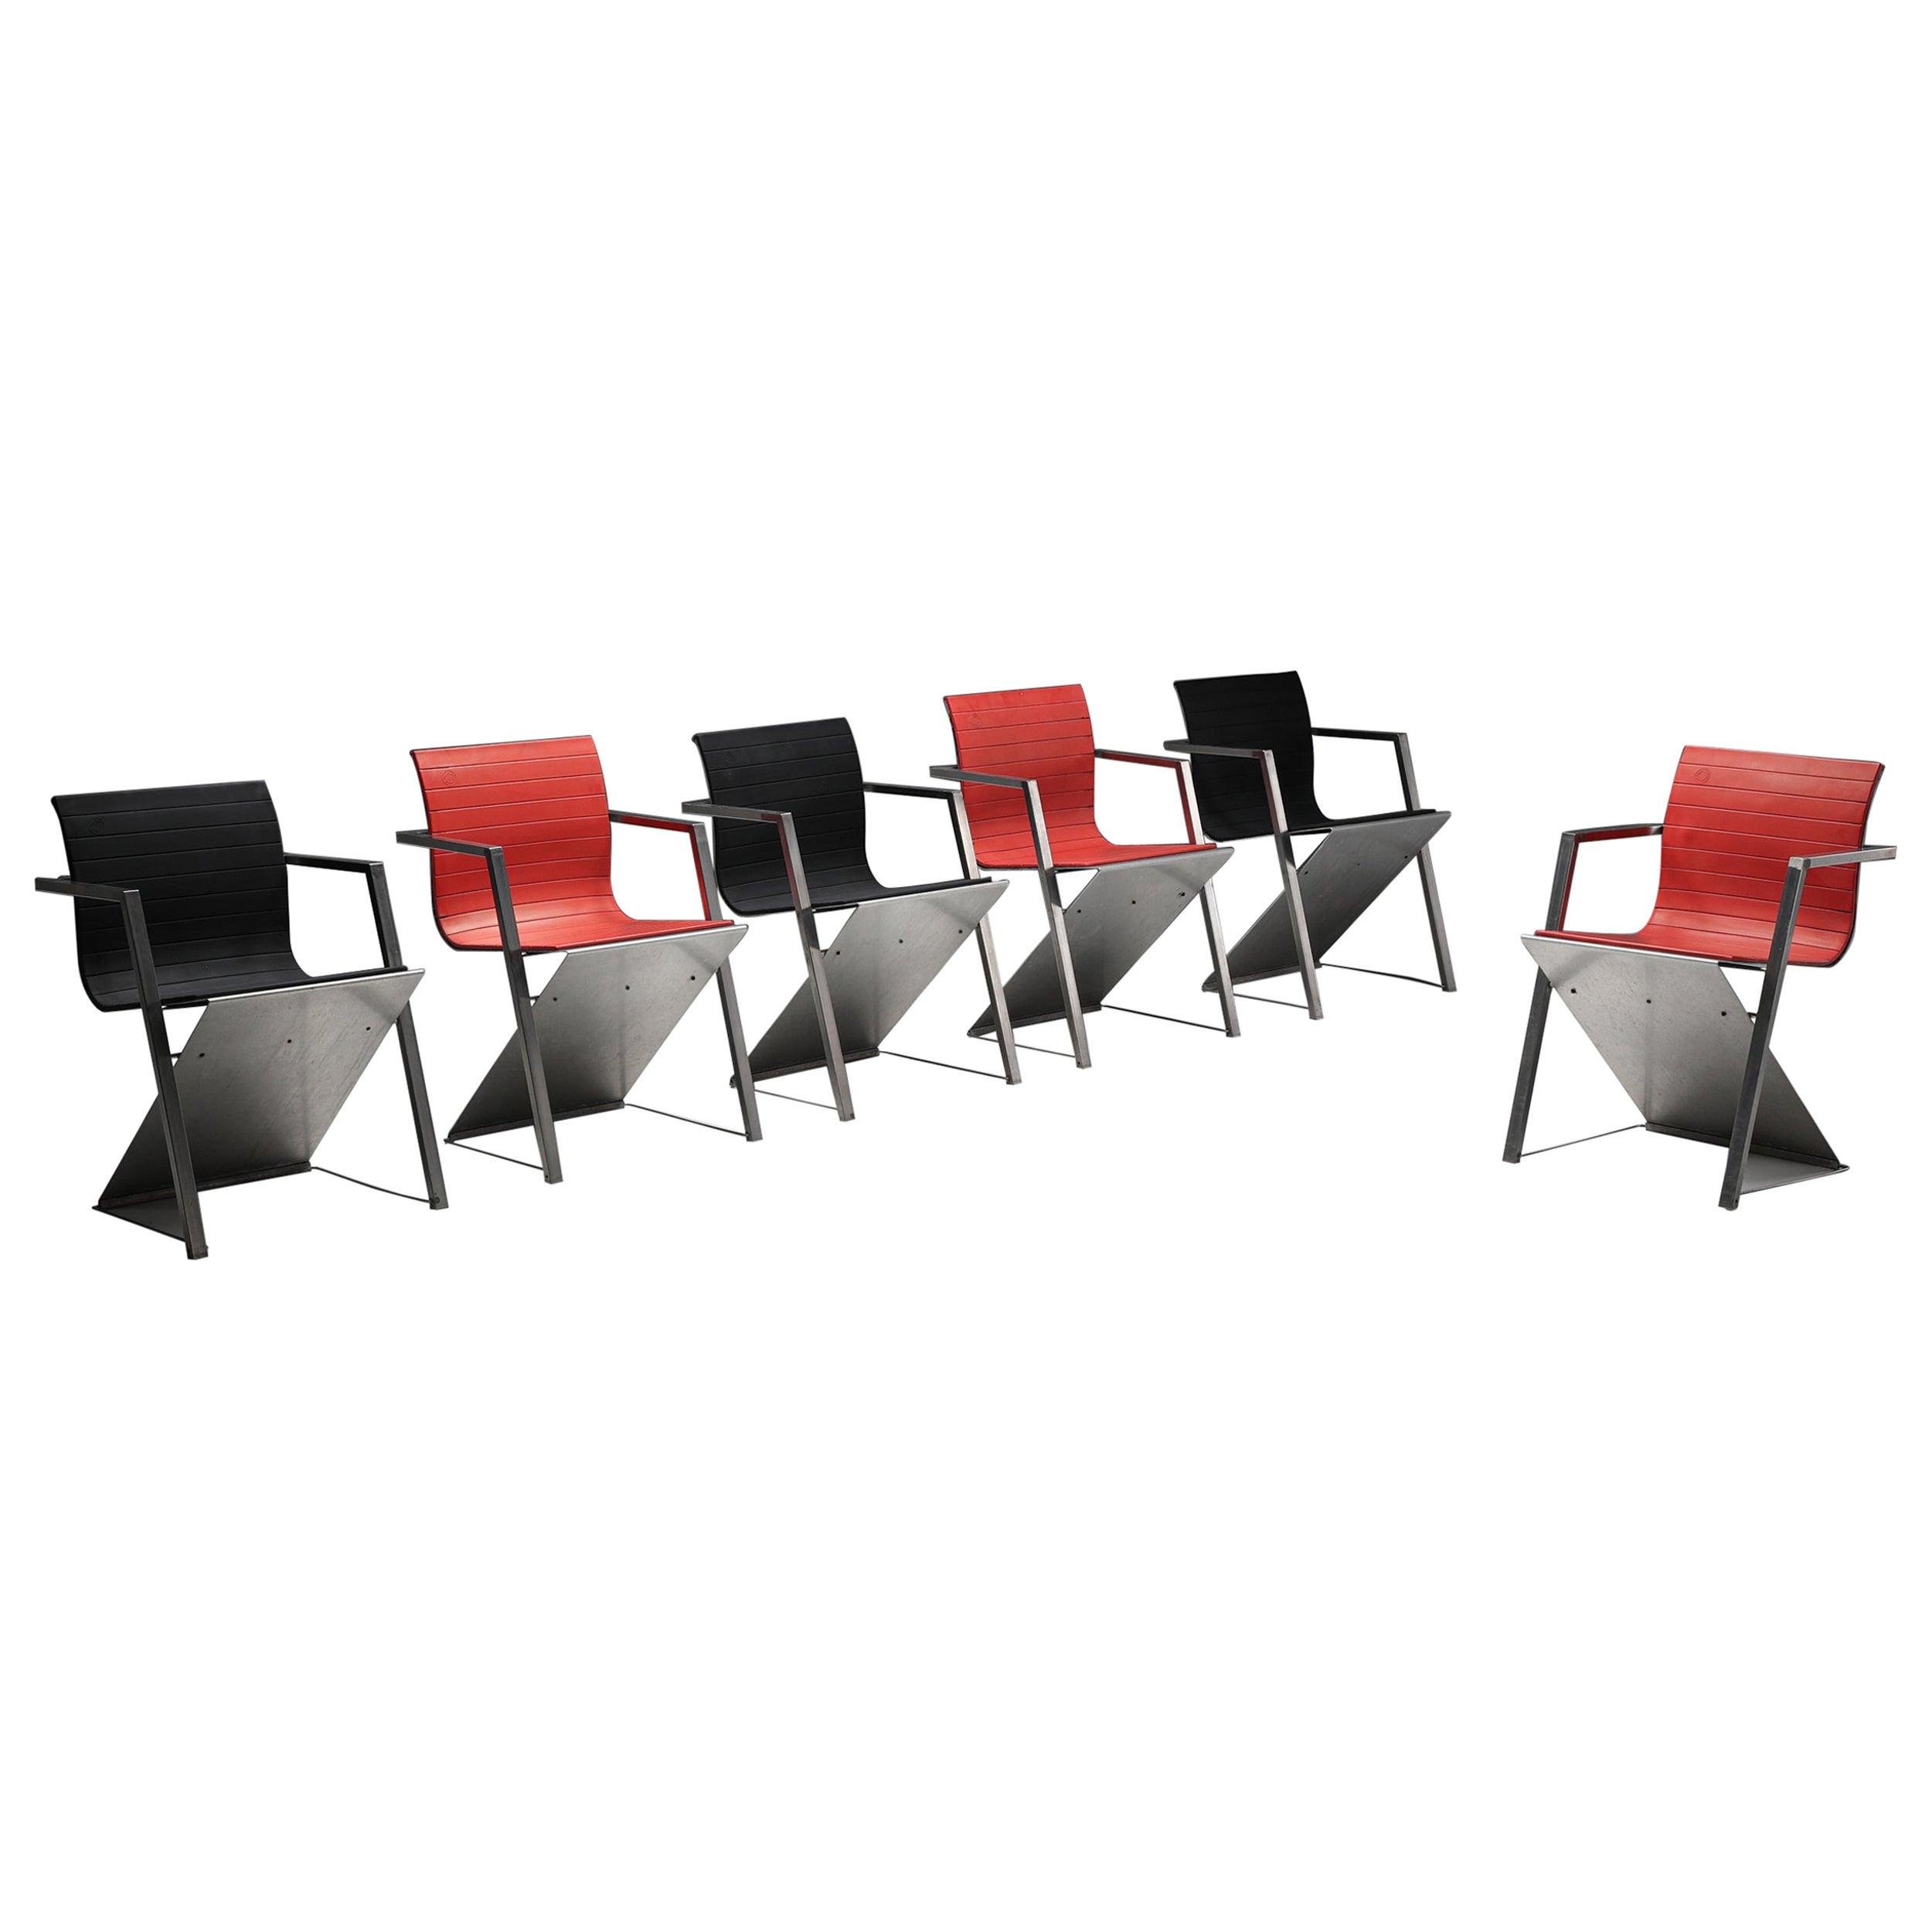 Pentagon Group Casino Model ‘d8’ Chair, Germany, 1987 For Sale